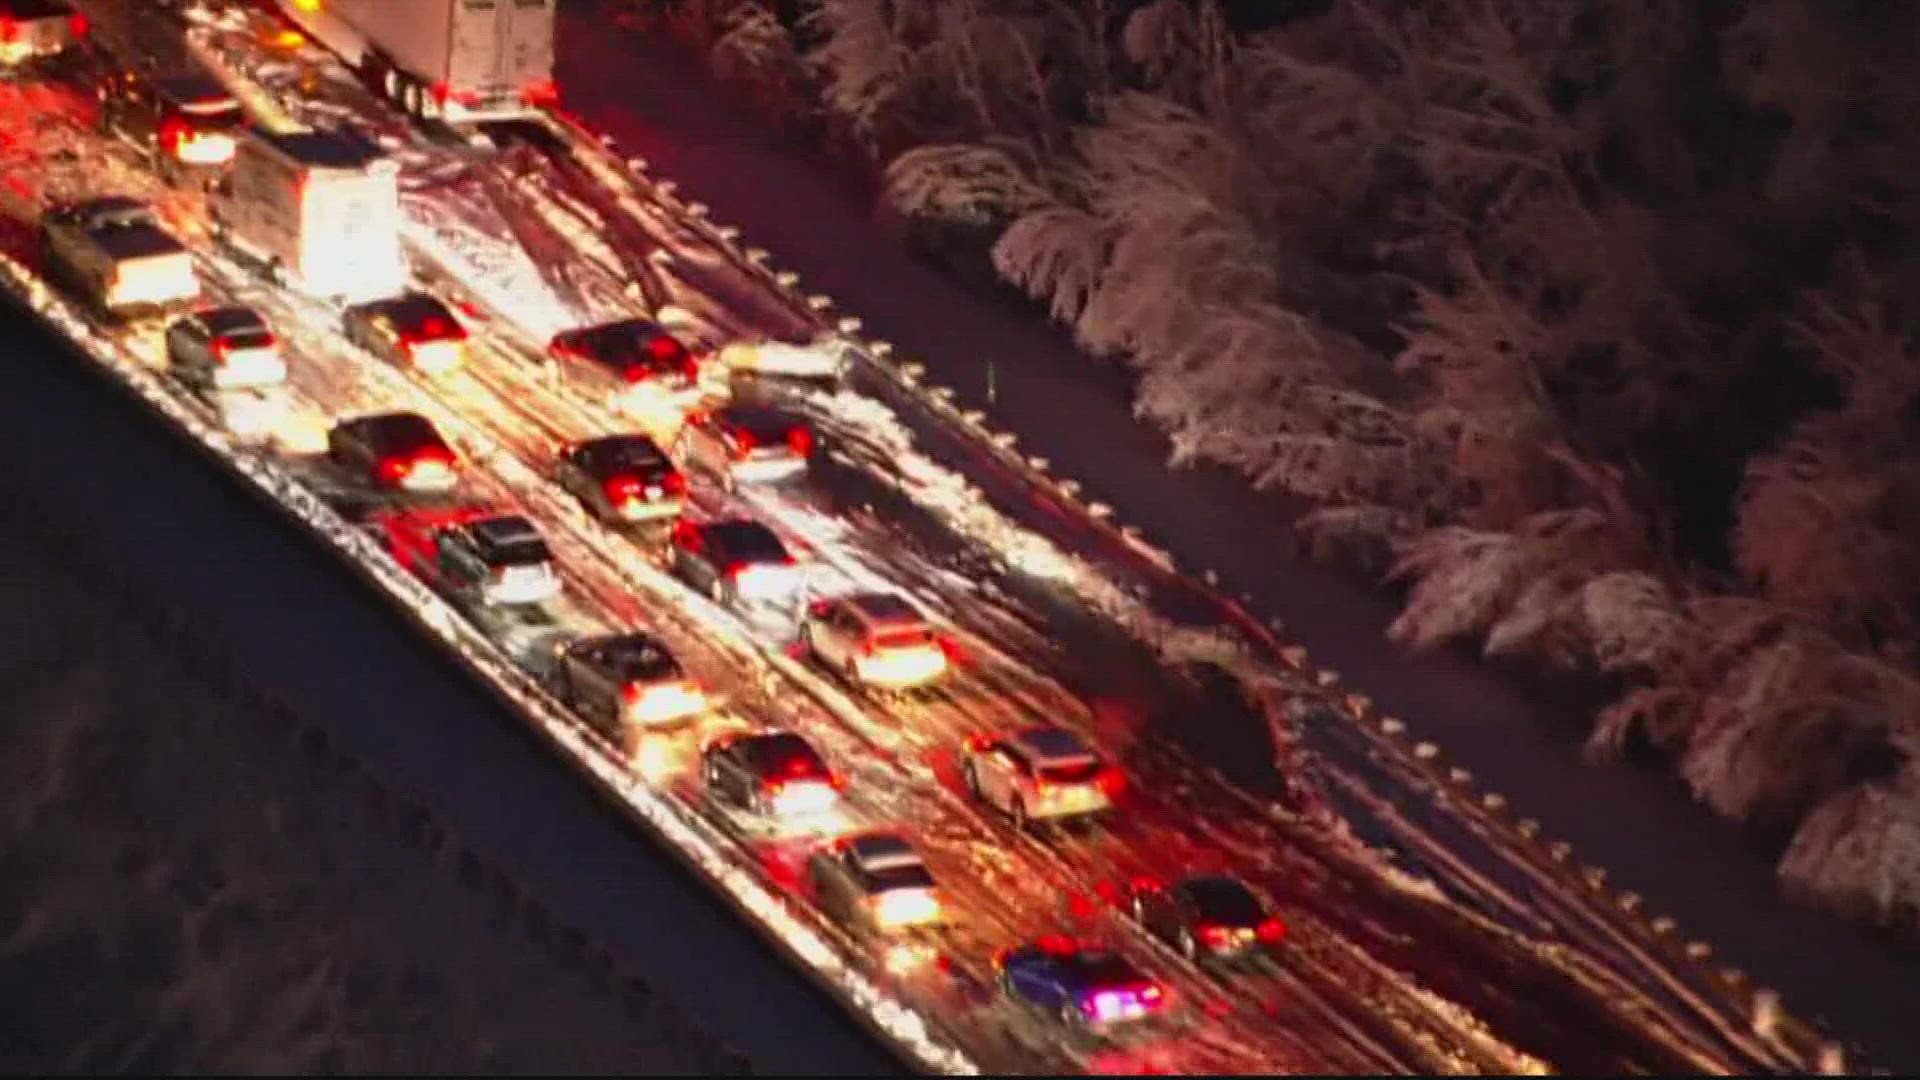 It's hard to believe it's been a year since this nightmare scene unfolded on Interstate-95 in Northern Virginia.